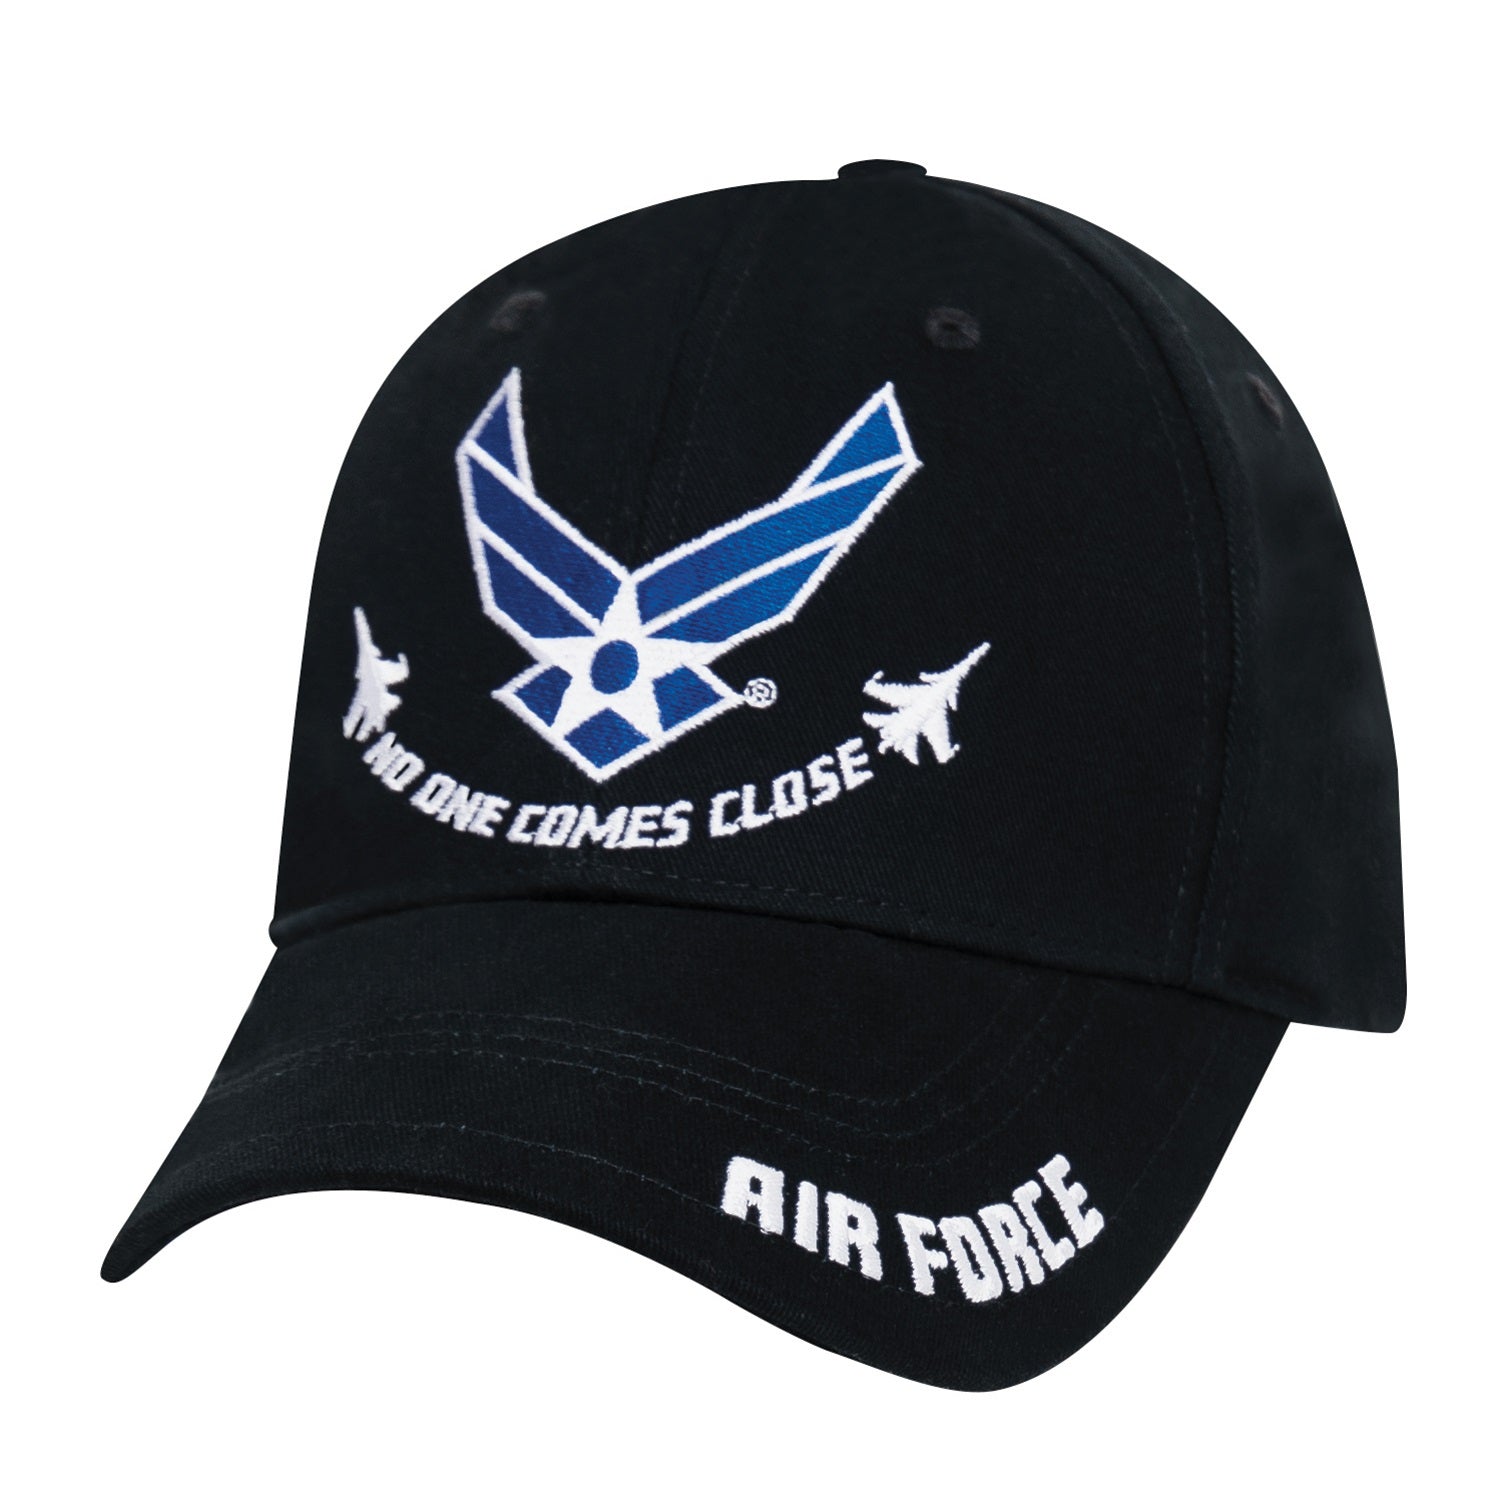 Rothco Air Force "No One Comes Close" Low Profile Cap - Black